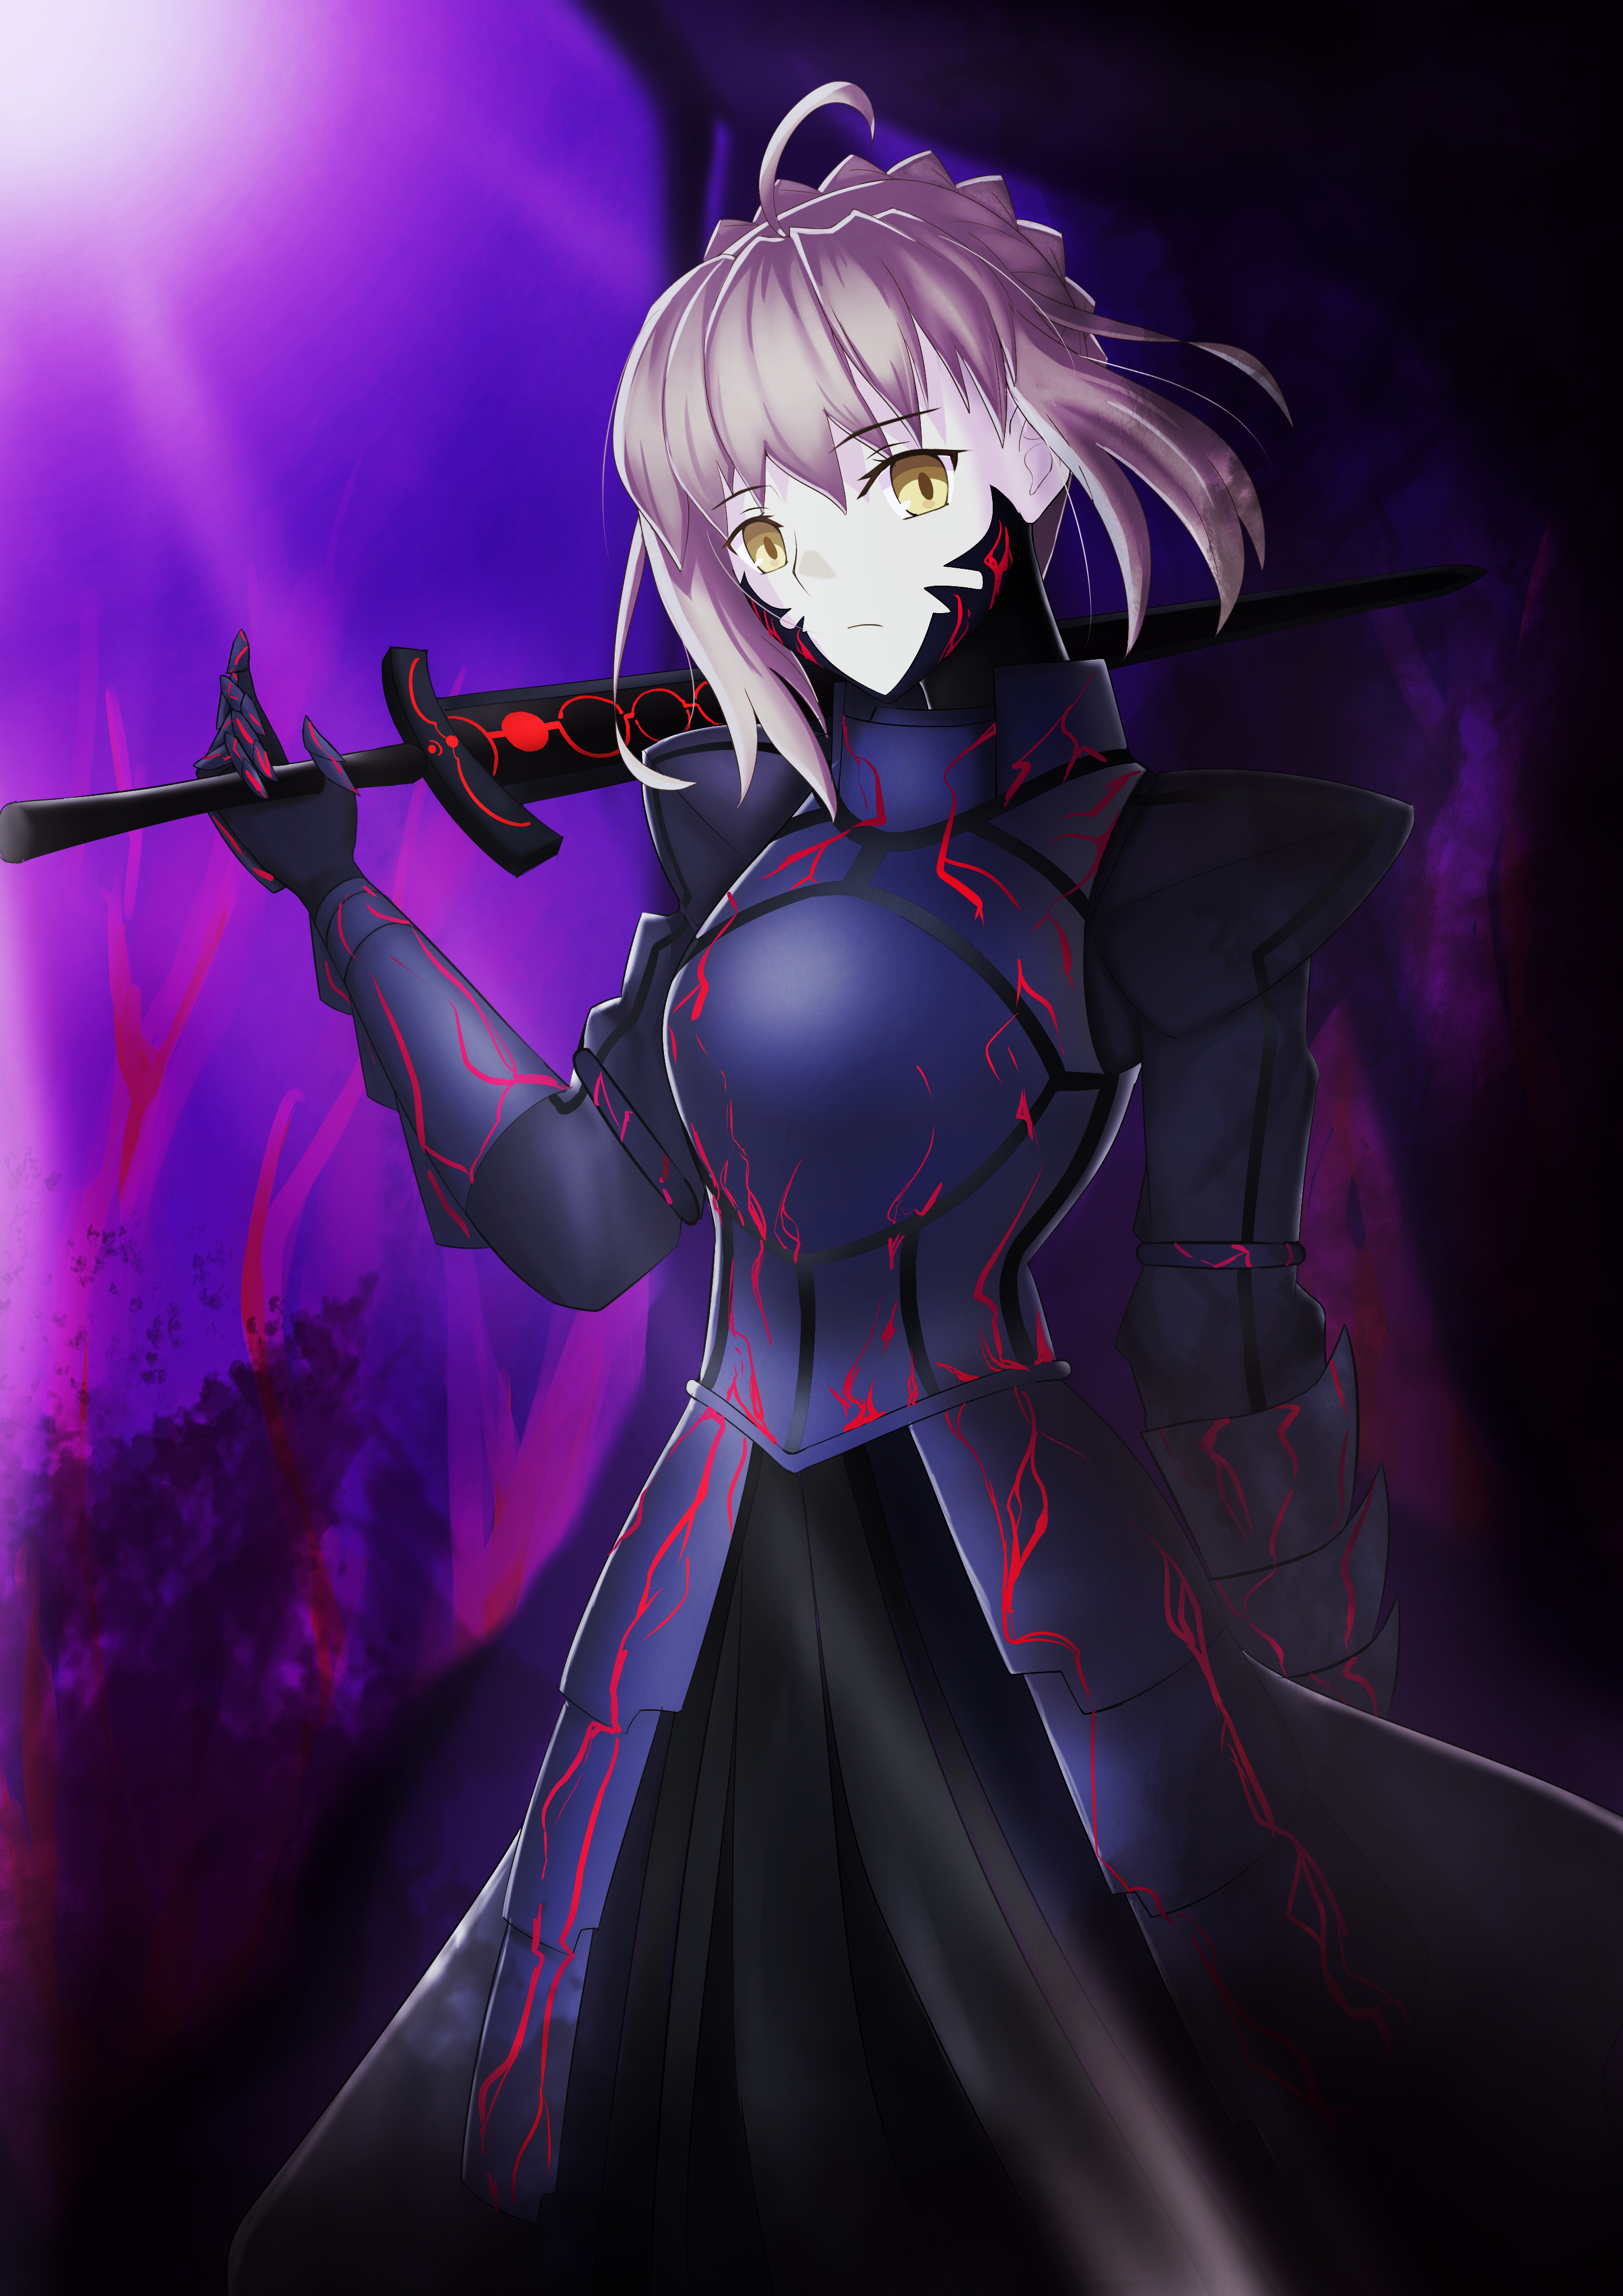 Saber Alter digital wallpaper, Fate Series, Fate/Stay Night, anime